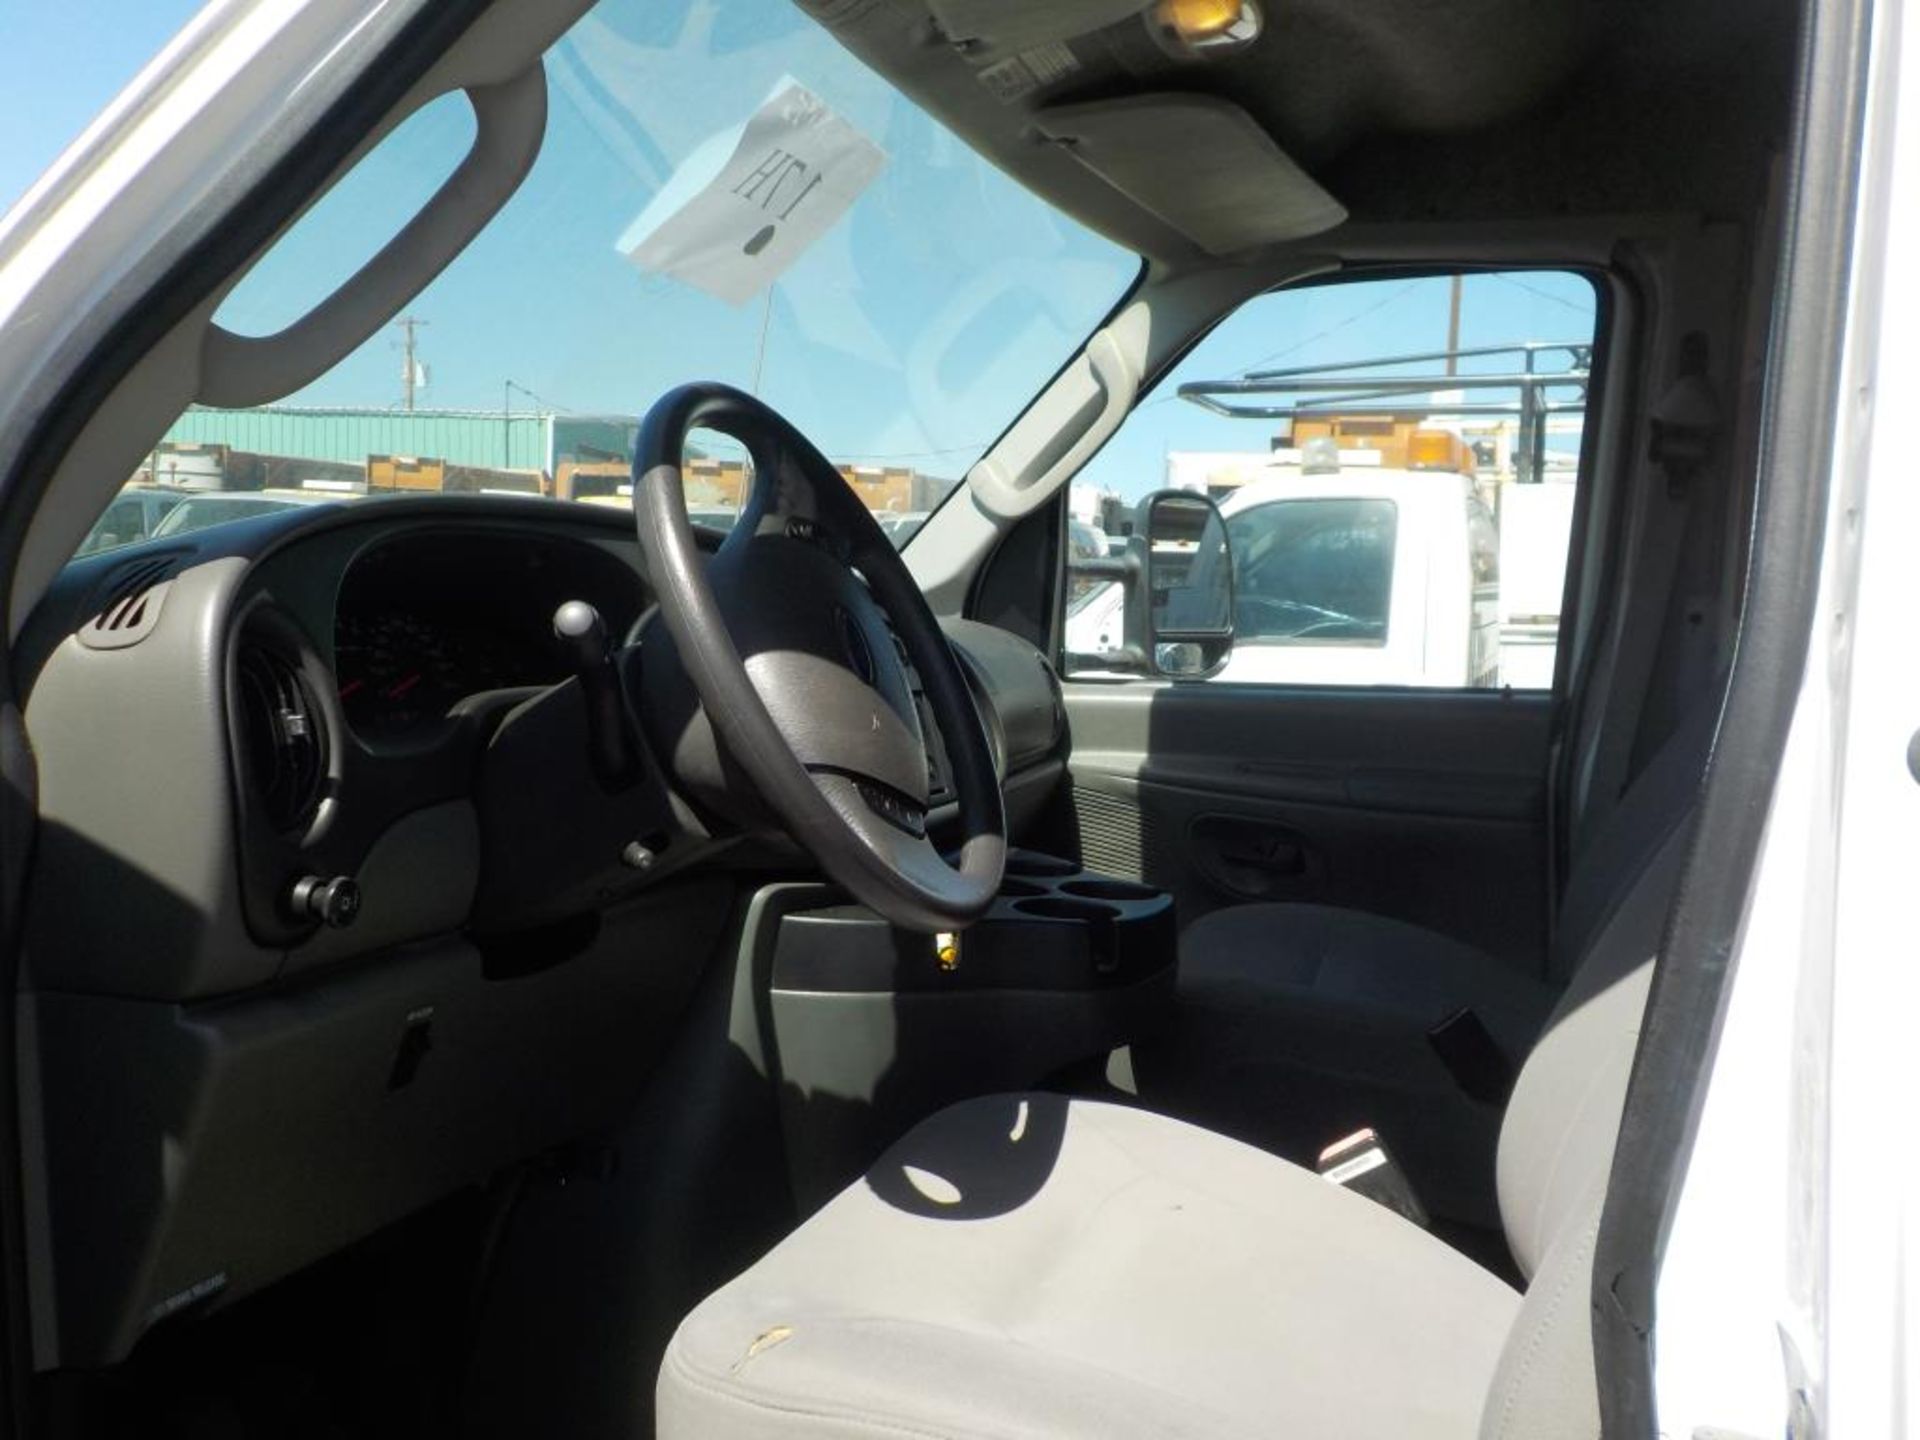 (Lot # 3914) - 2006 Ford E-450 SD Field Operations Van - Image 8 of 10